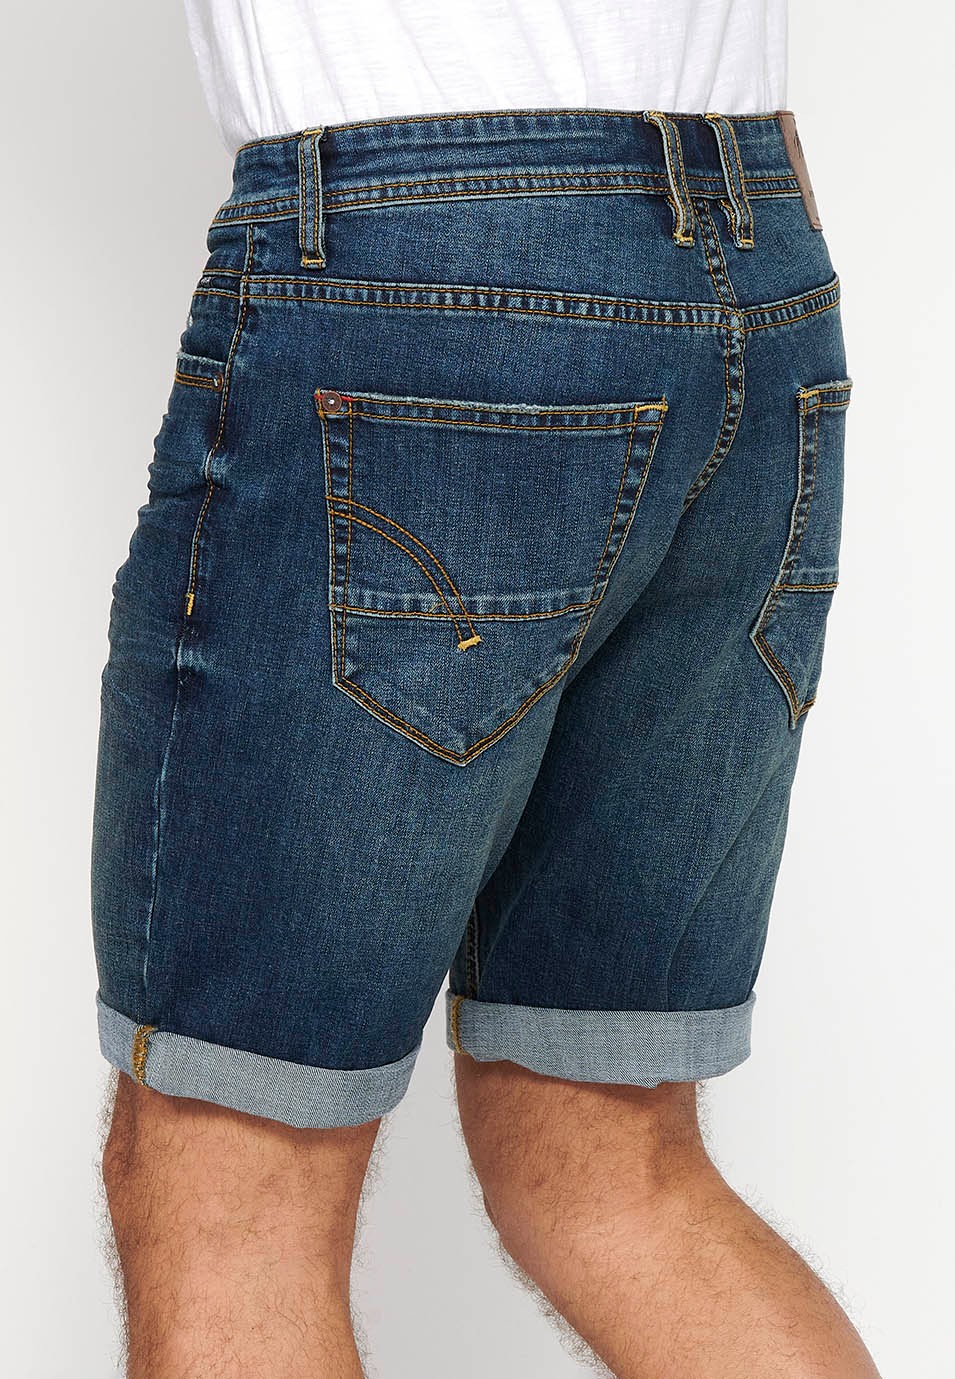 Bermuda denim shorts with front zipper and button closure with five pockets, one blue pocket pocket for Men 6